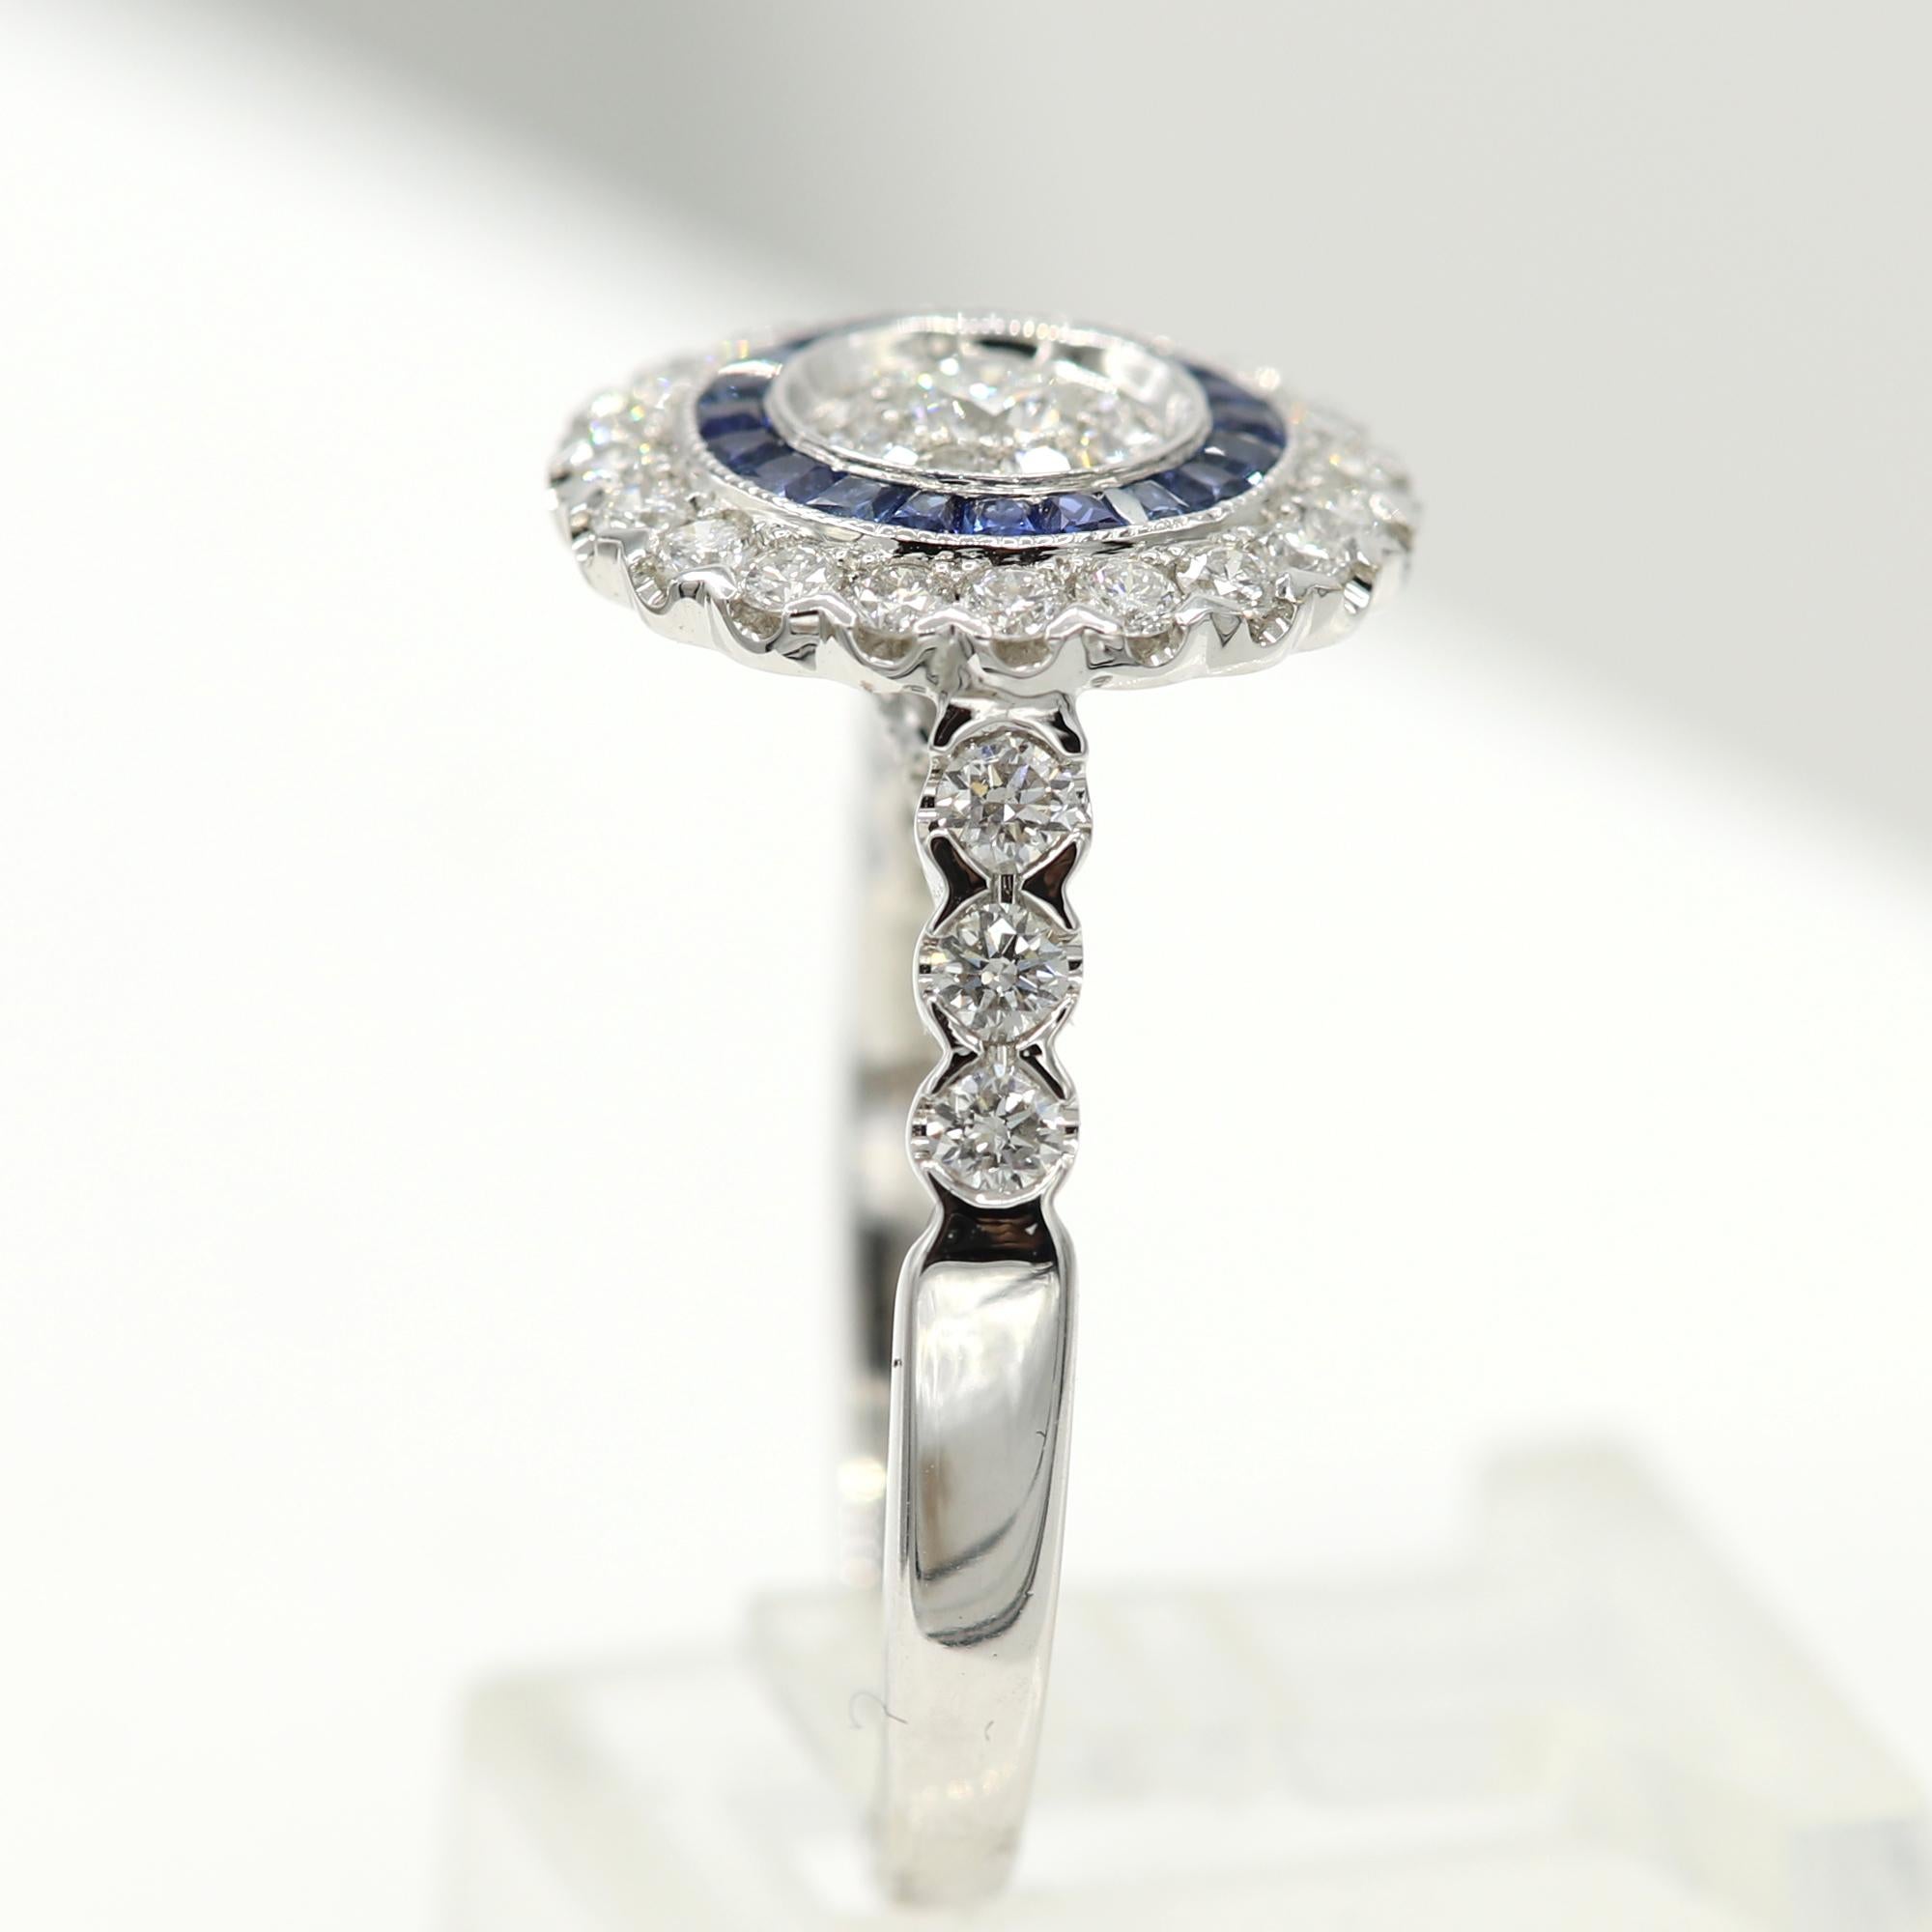 Brilliant Art Deco Style Ring. 18k White Gold 6.40 grams. Total all Diamonds 1.06 carat (center stones are a super cluster of diamonds that look as a single stone to the eye) GH-SI. Blue sapphire total 0.41 carat. design area on top diameter approx